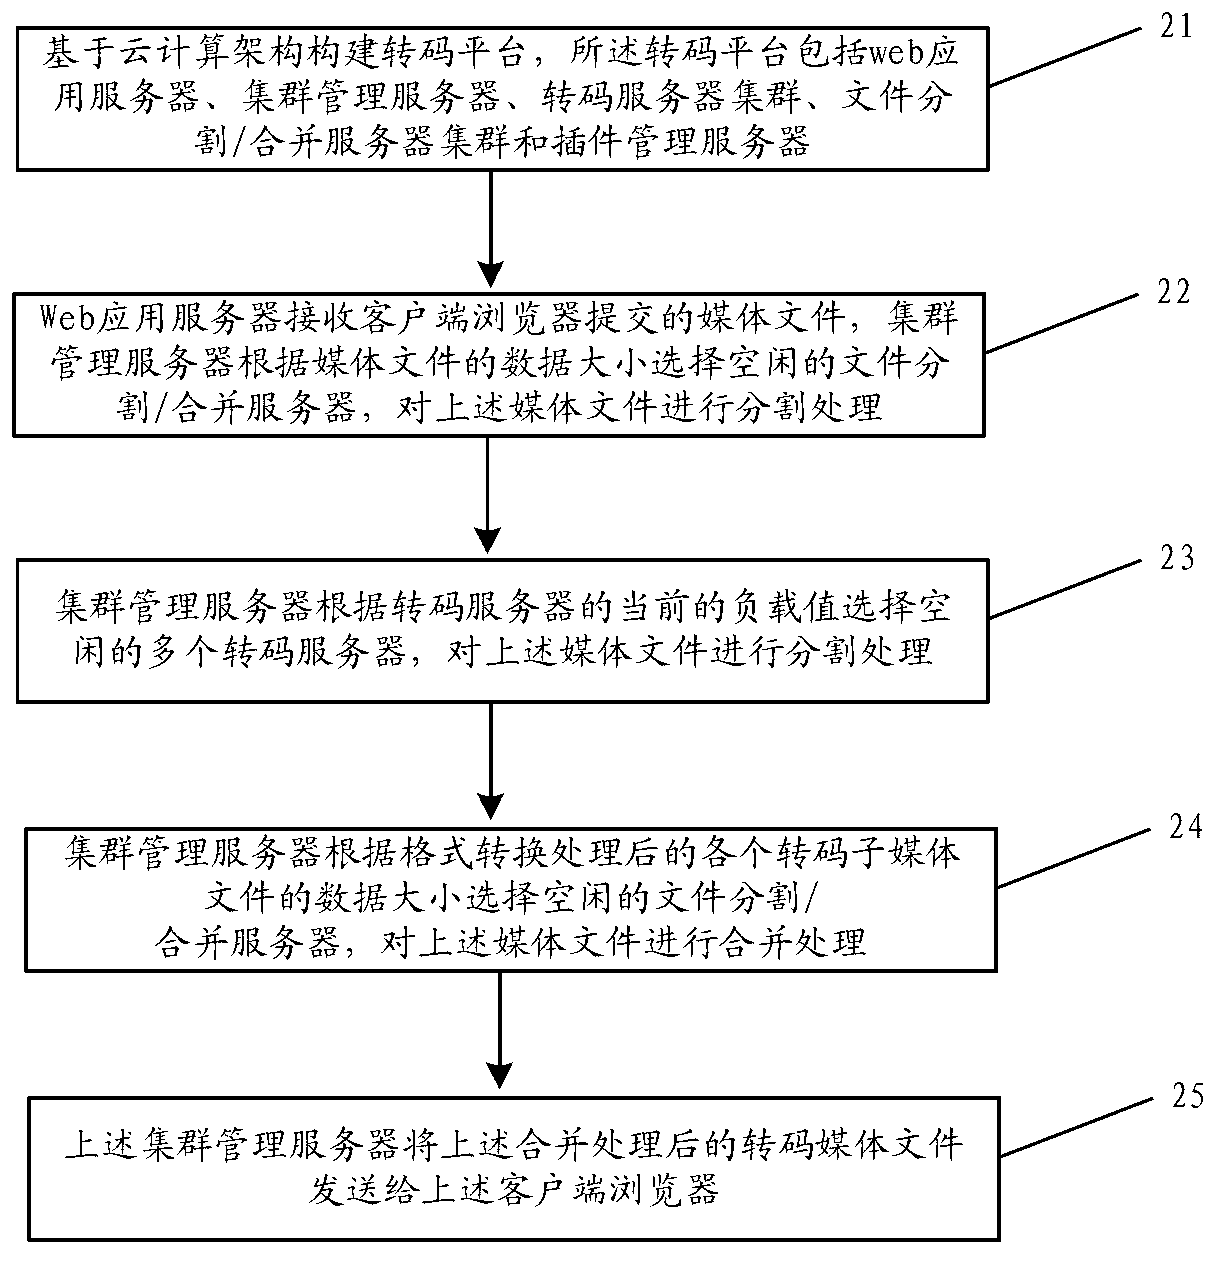 Media format conversion method and system based on cloud computing architecture